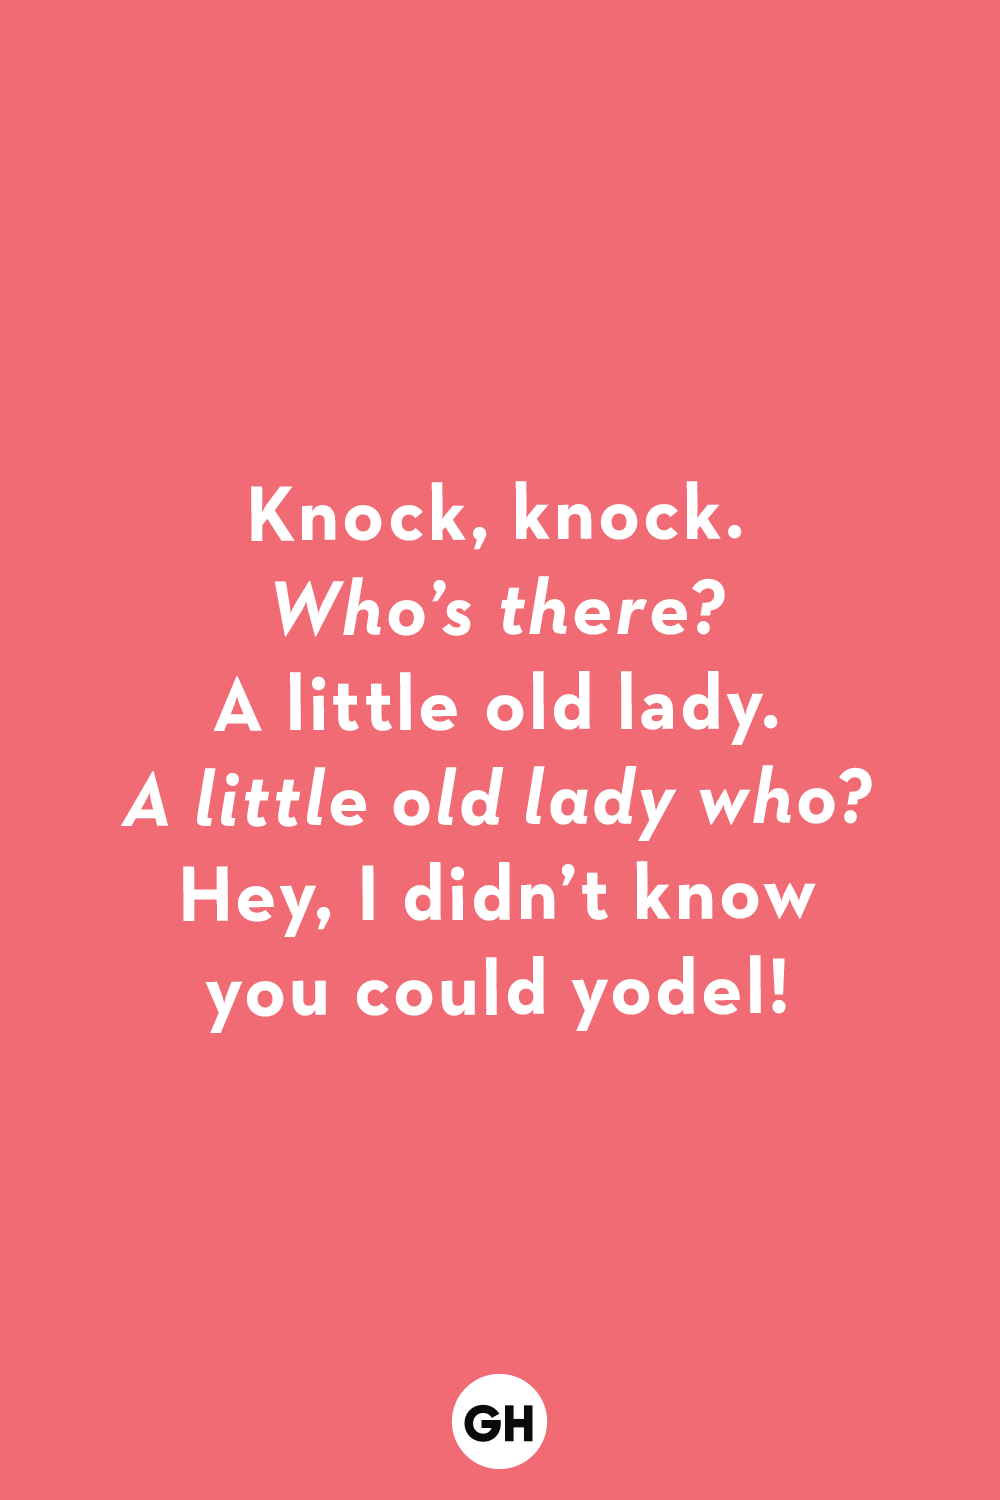 The Best Jokes For Kids Family Friendly Gags Knock Knock Jokes And Riddles